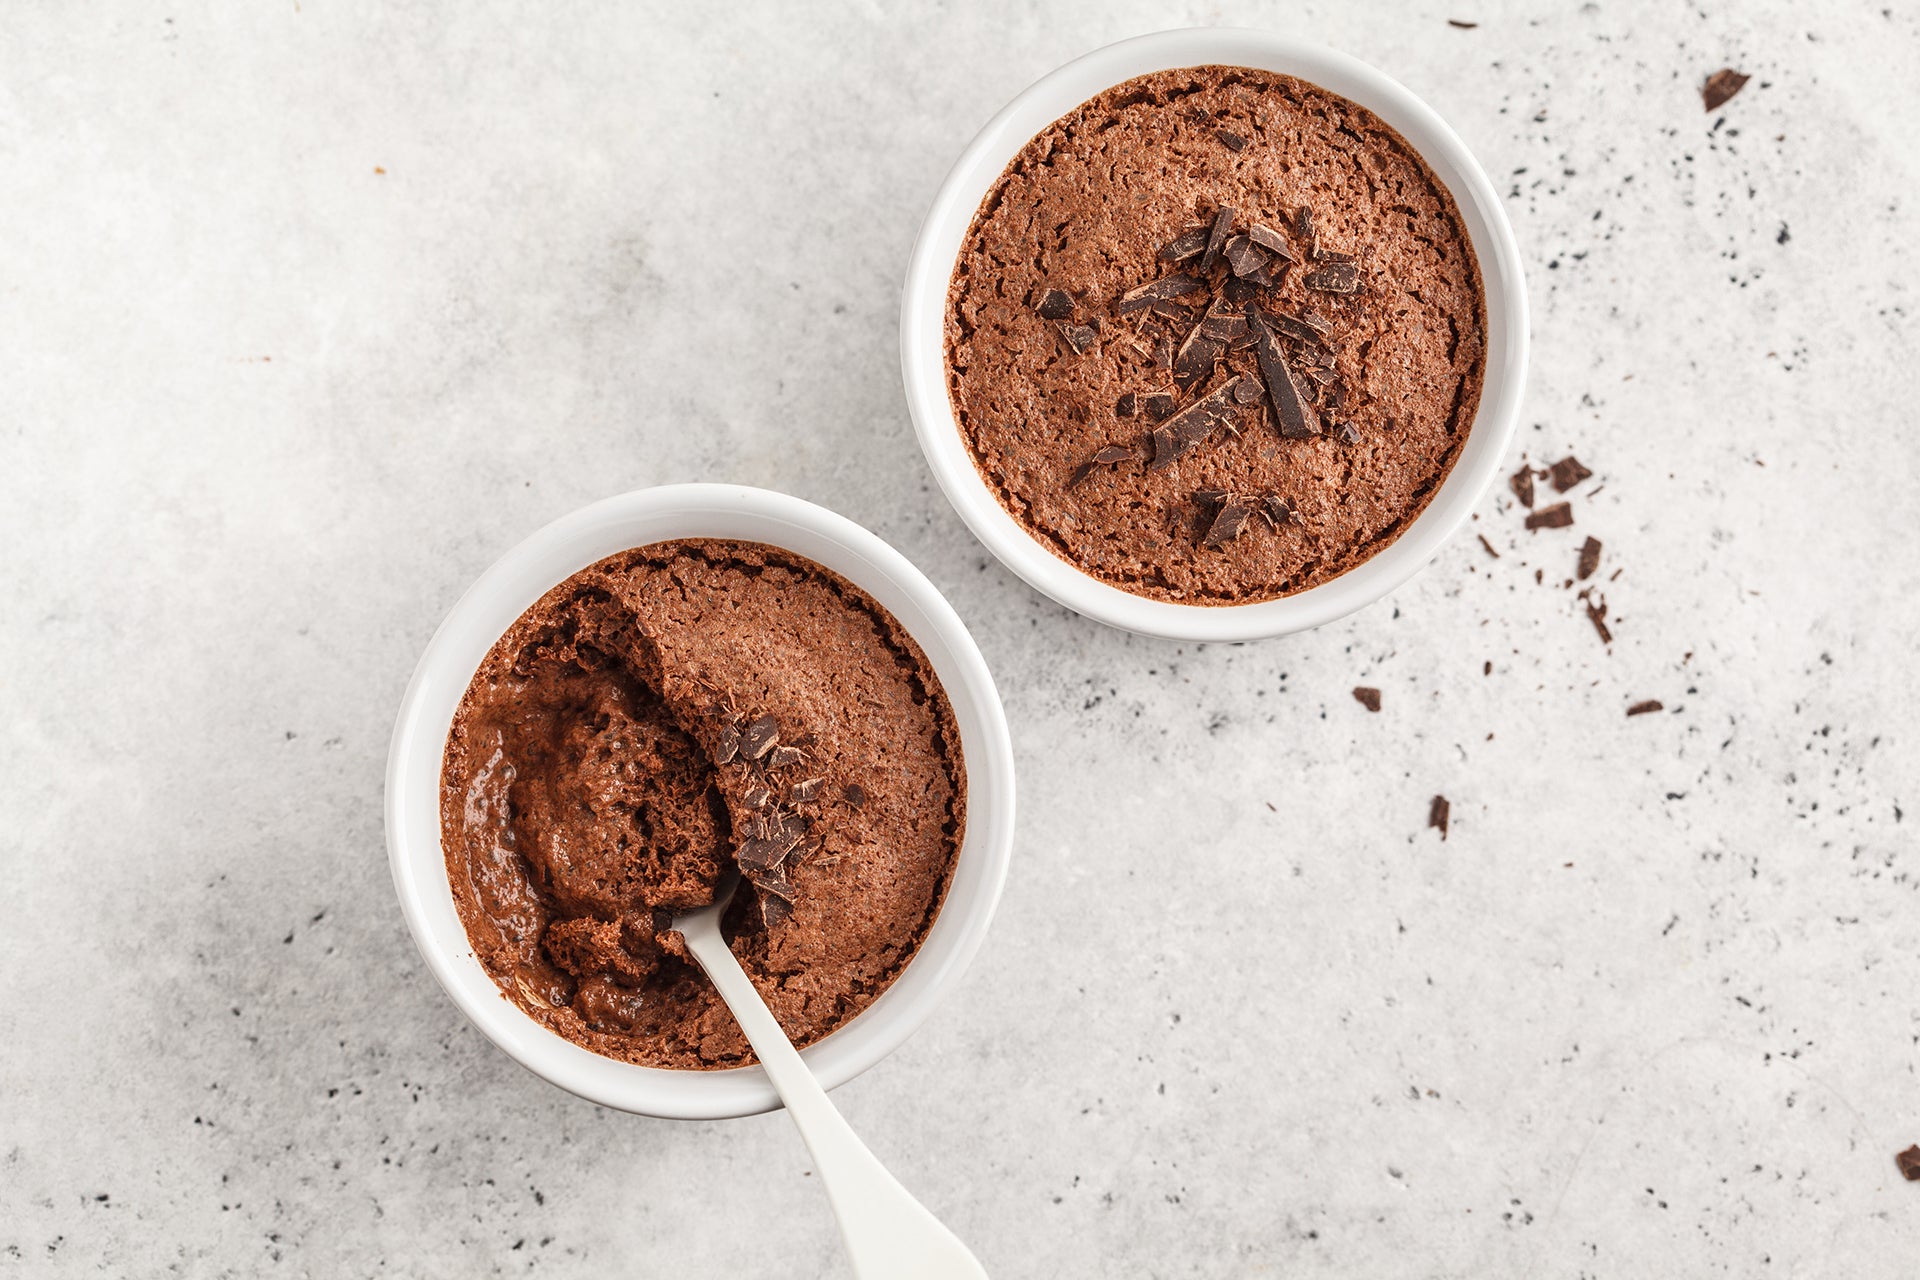 Indulge Without Guilt: 4 Easy Vegan Dessert Recipes That Satisfy